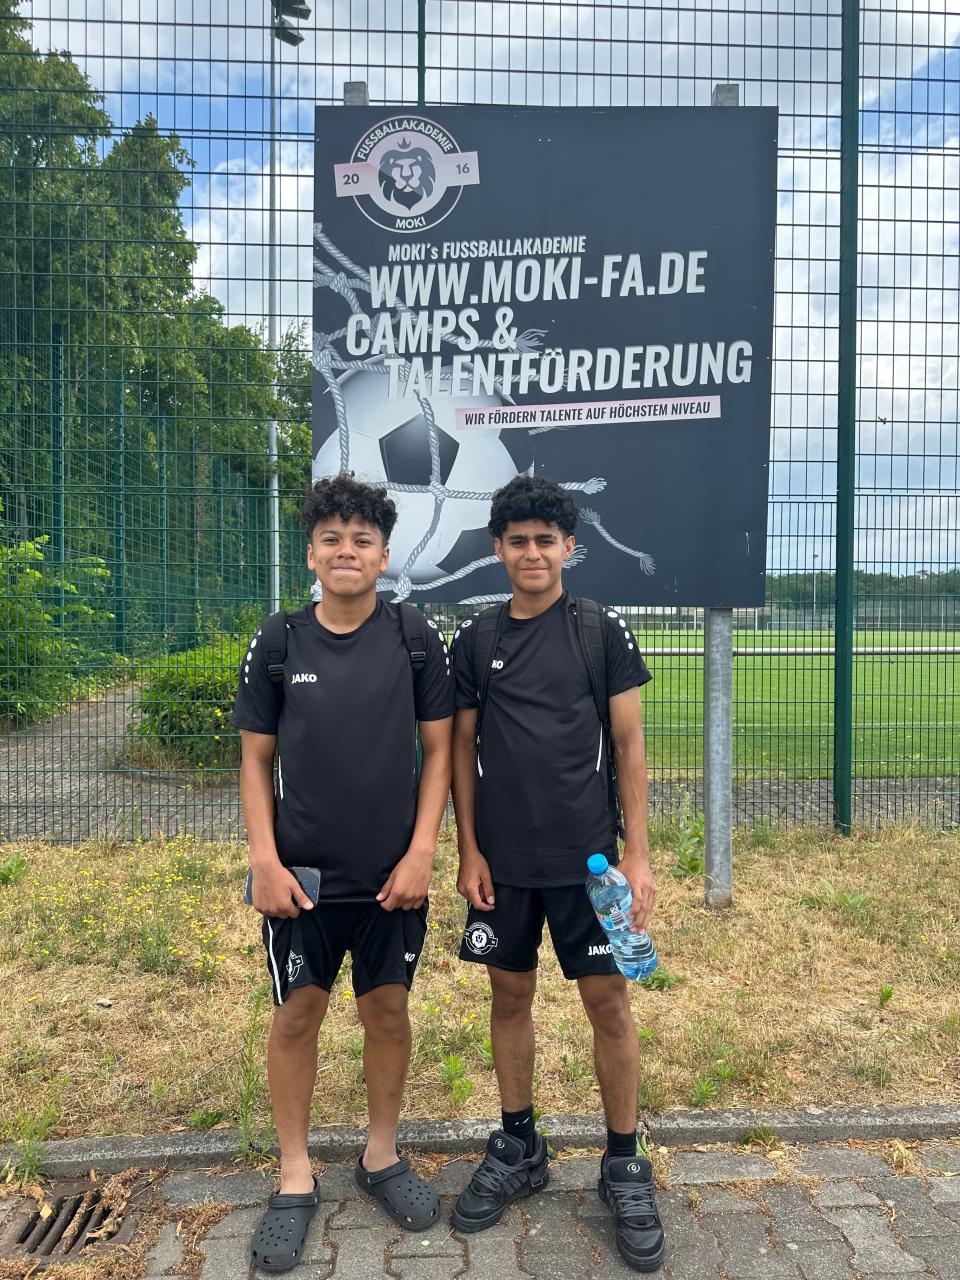 Angelo Vieyra (left) and Giovanni Medina (right) pose for a photo during one of their days at the Moki Fussballakademie soccer youth trial in Germany.